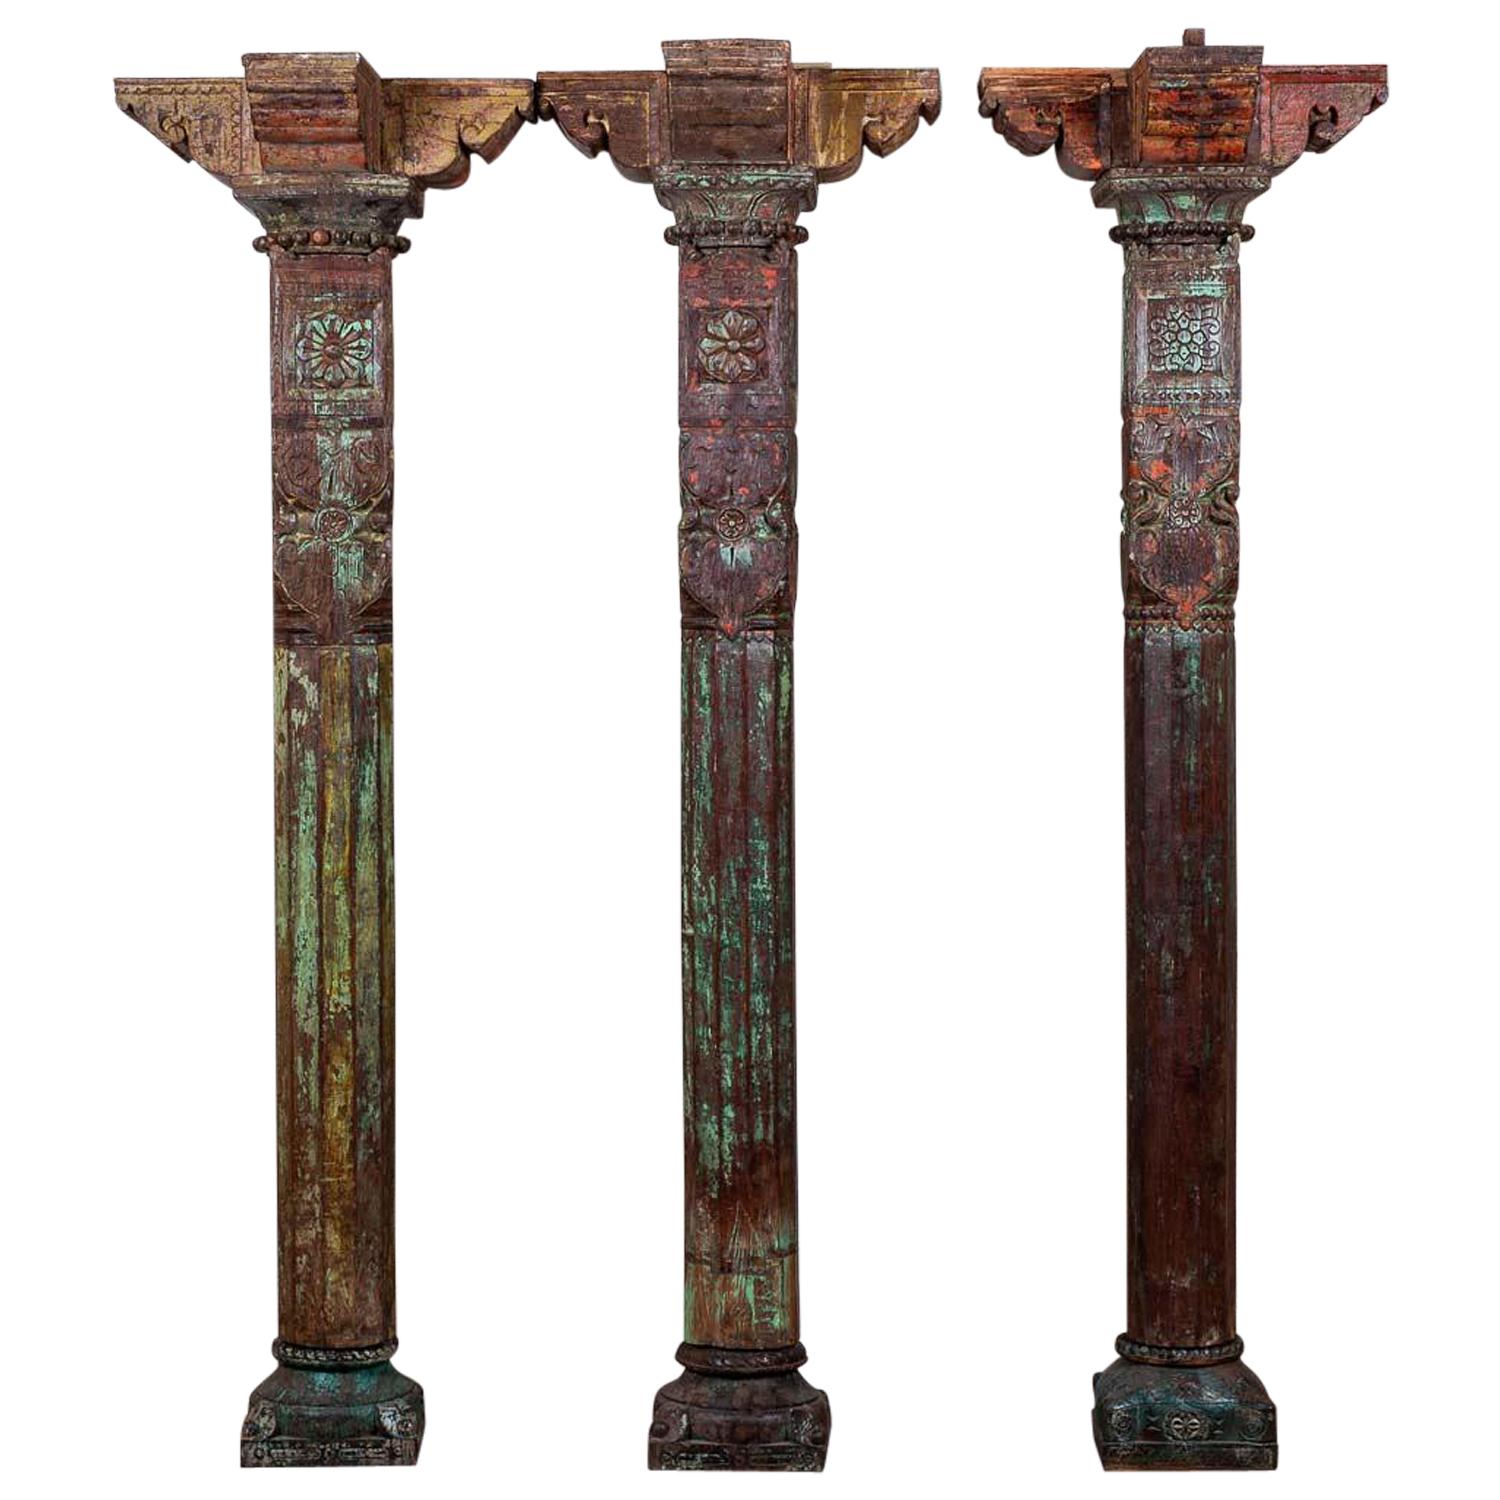 Imposing Reclaimed Teak Pillars with Capitals, 20th Century For Sale